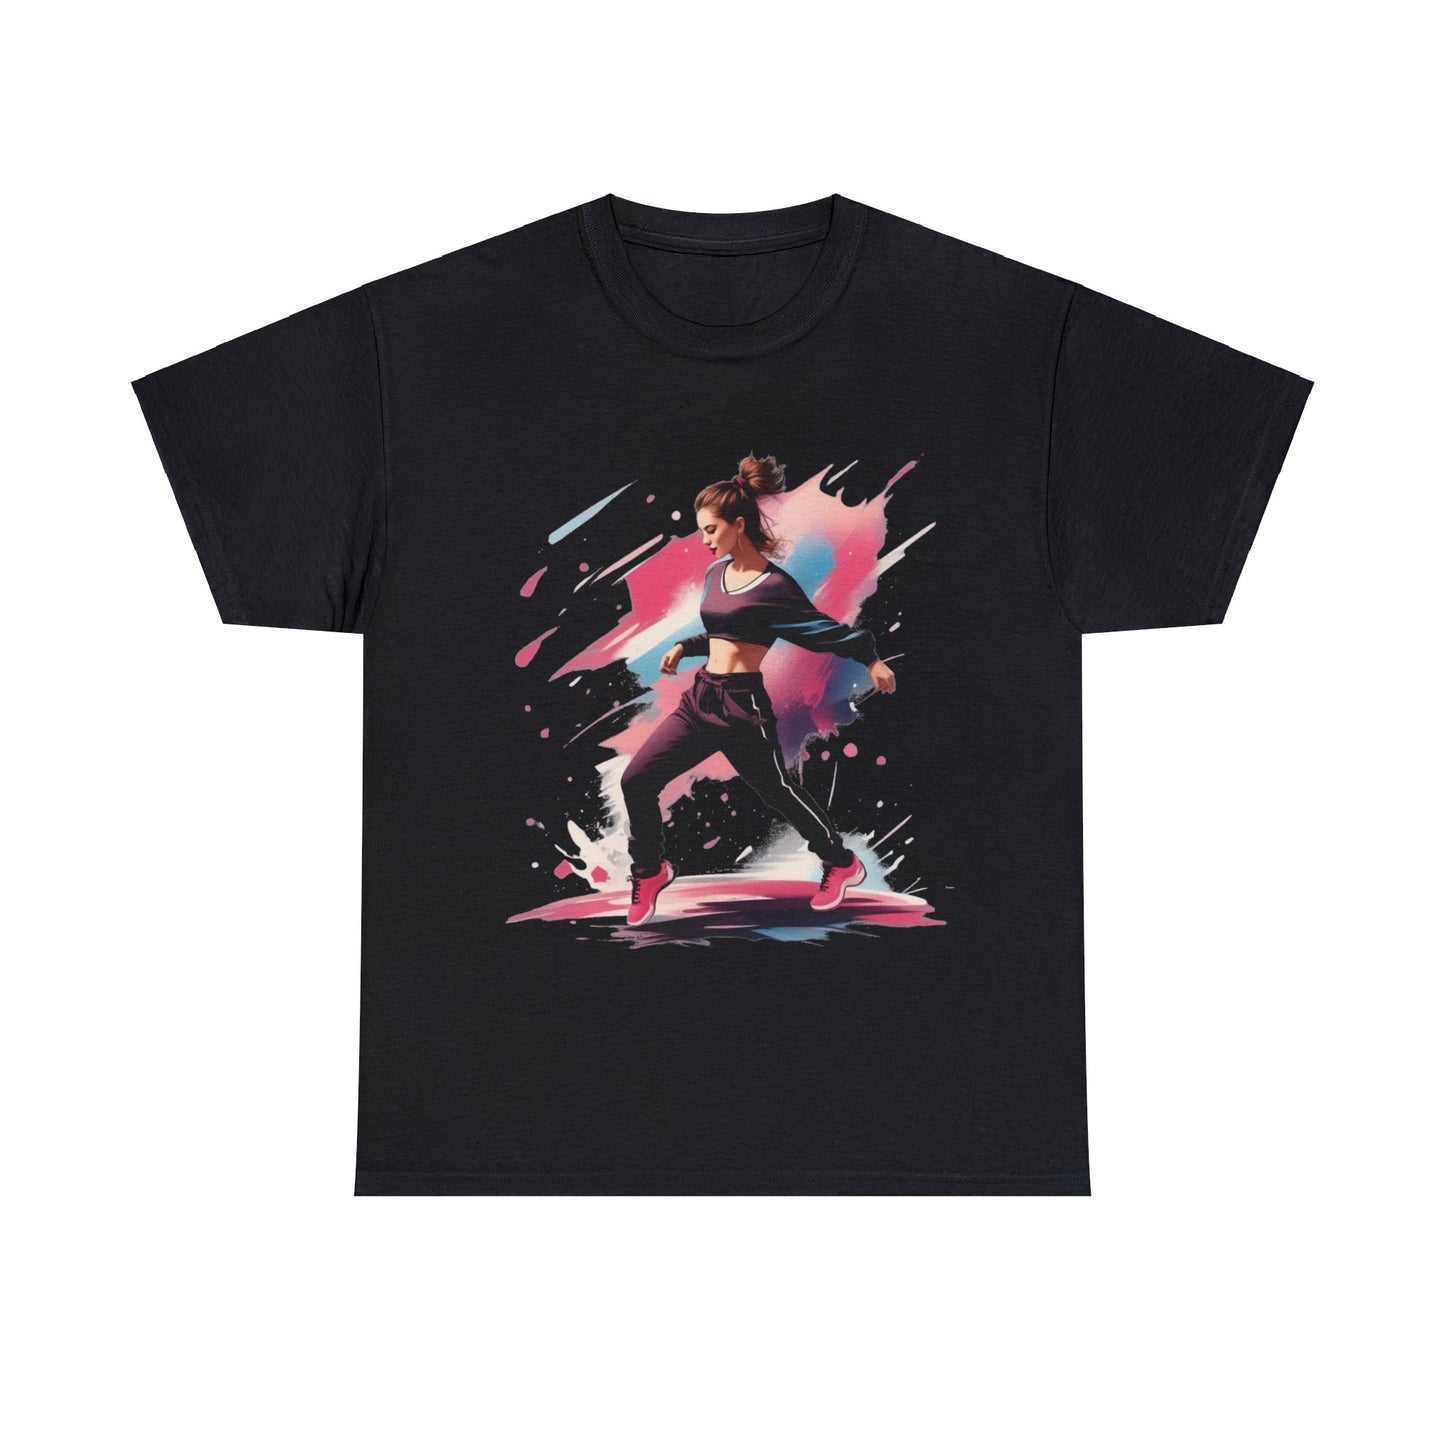 Dance Like Nobody's Watching: Pink T-Shirt with Dancing Woman Graphic